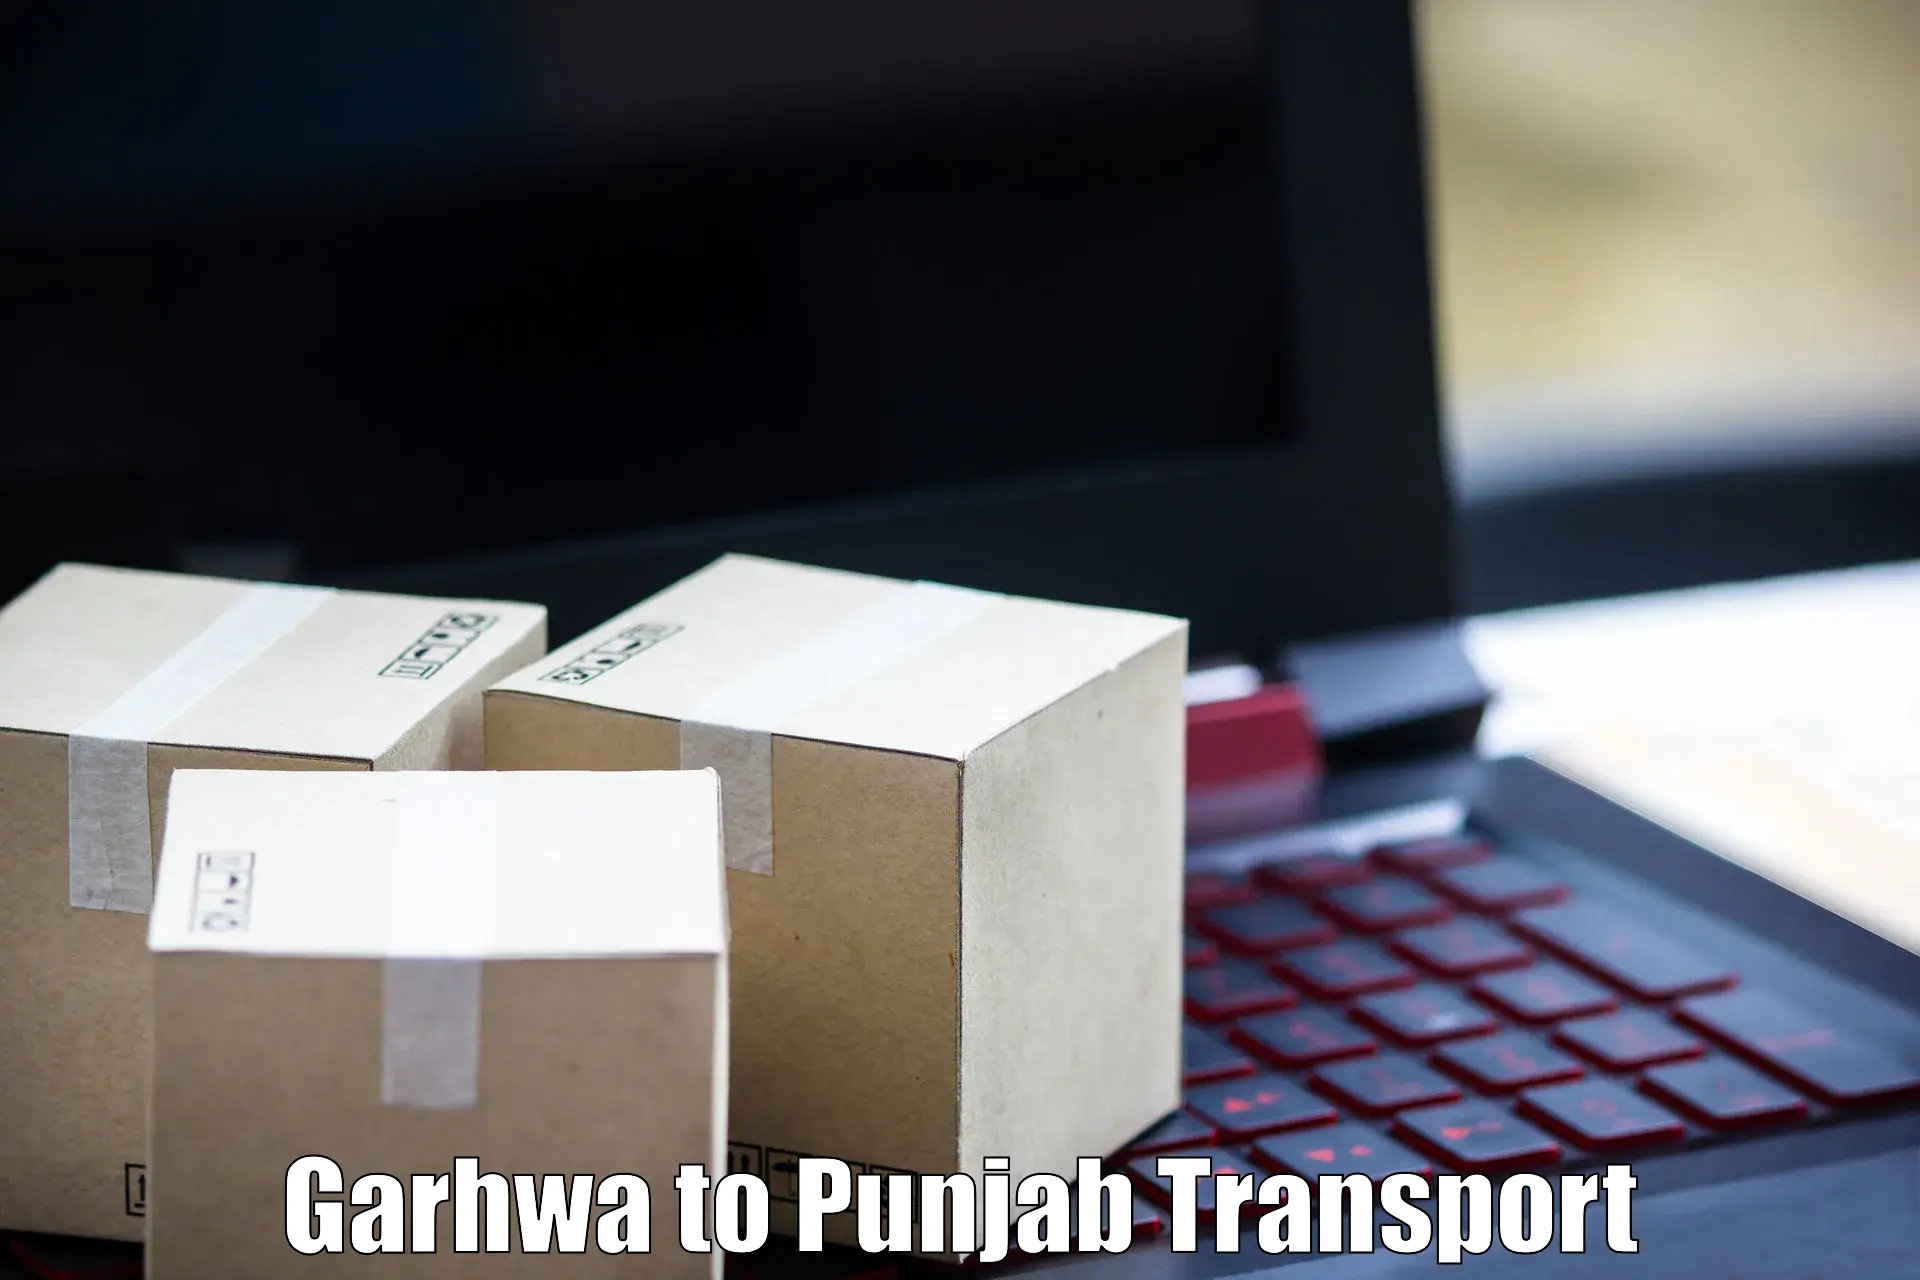 Two wheeler transport services in Garhwa to Faridkot